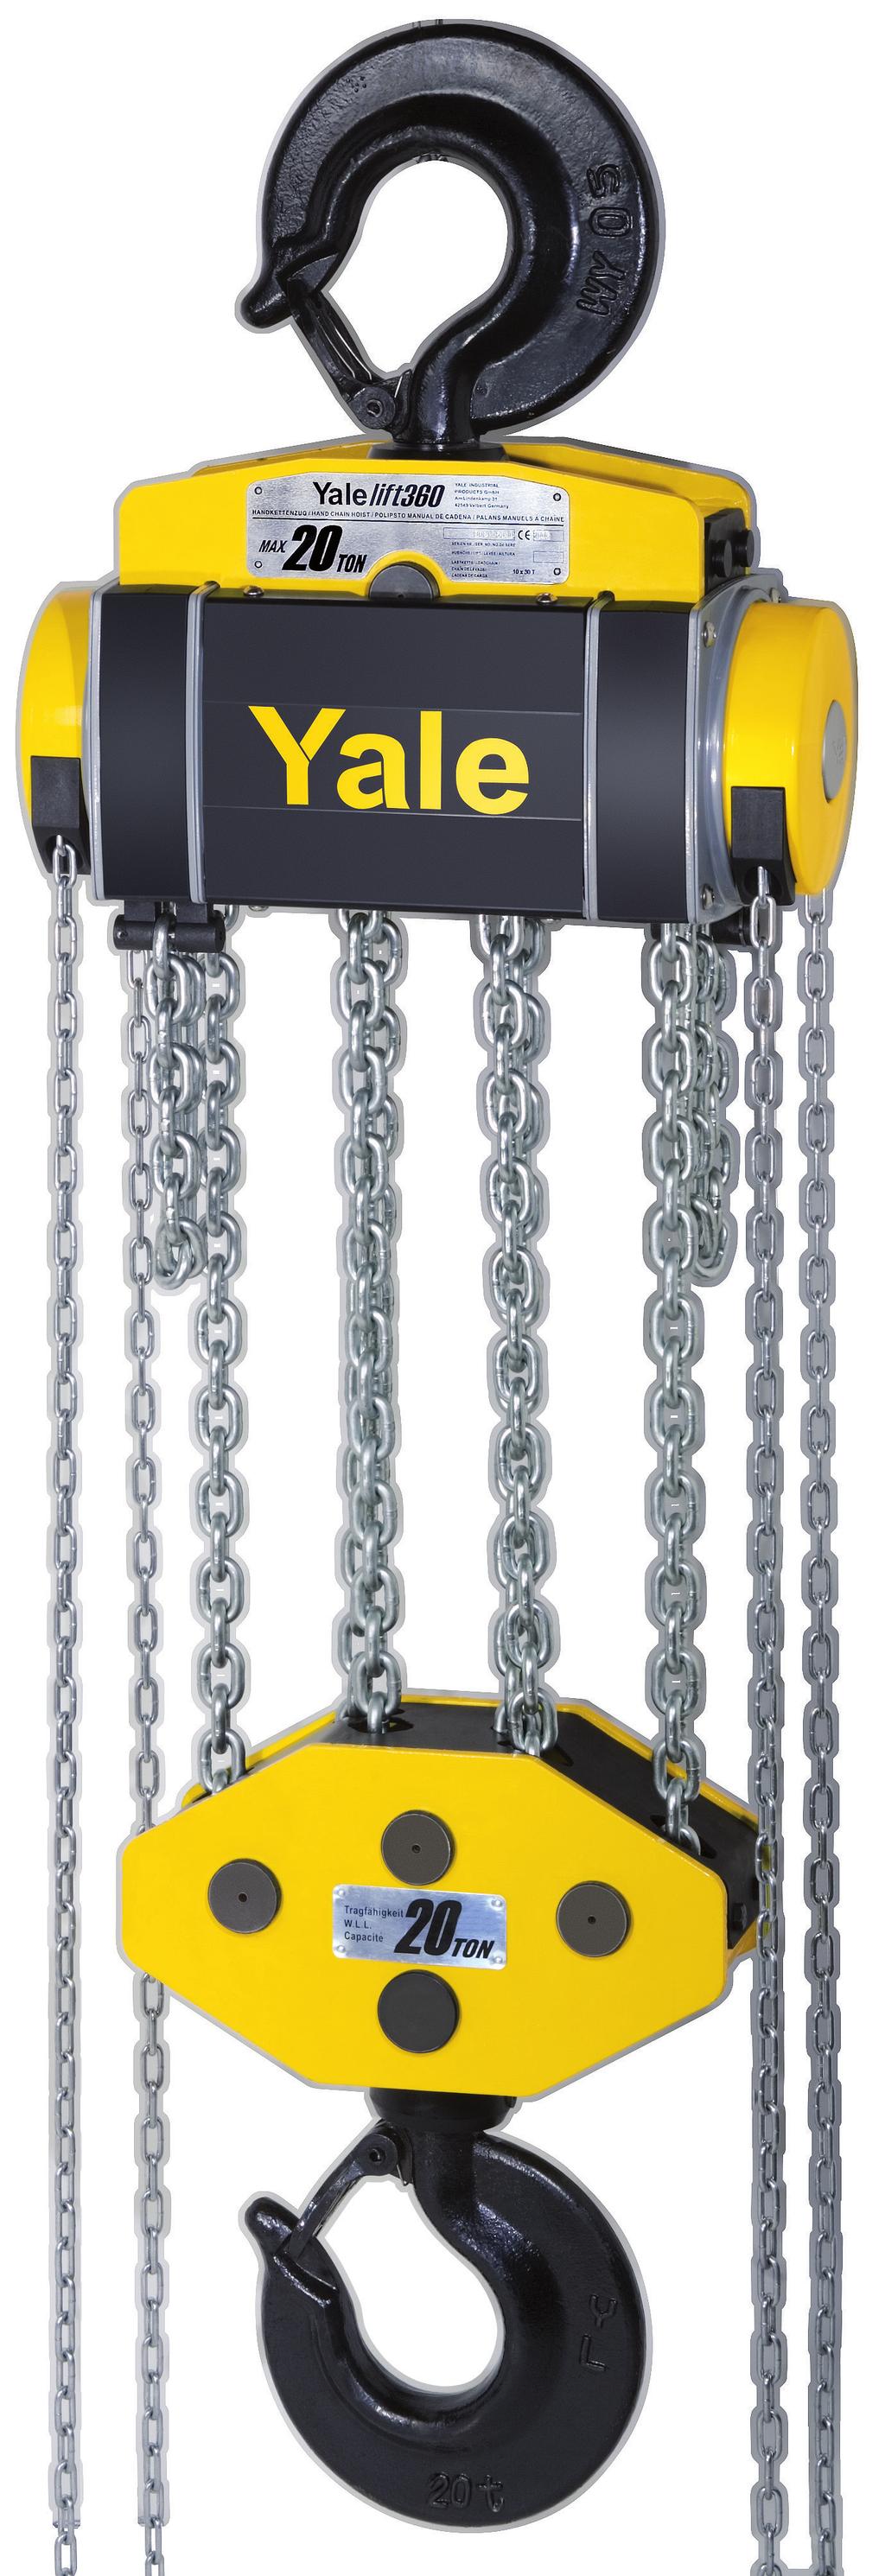 The hardened load sheave with five precision machined pockets ensures accurate movement of the load chain. The low headroom (hook-to-hook dimension 1010 mm) allows maximum use of the lifting height.